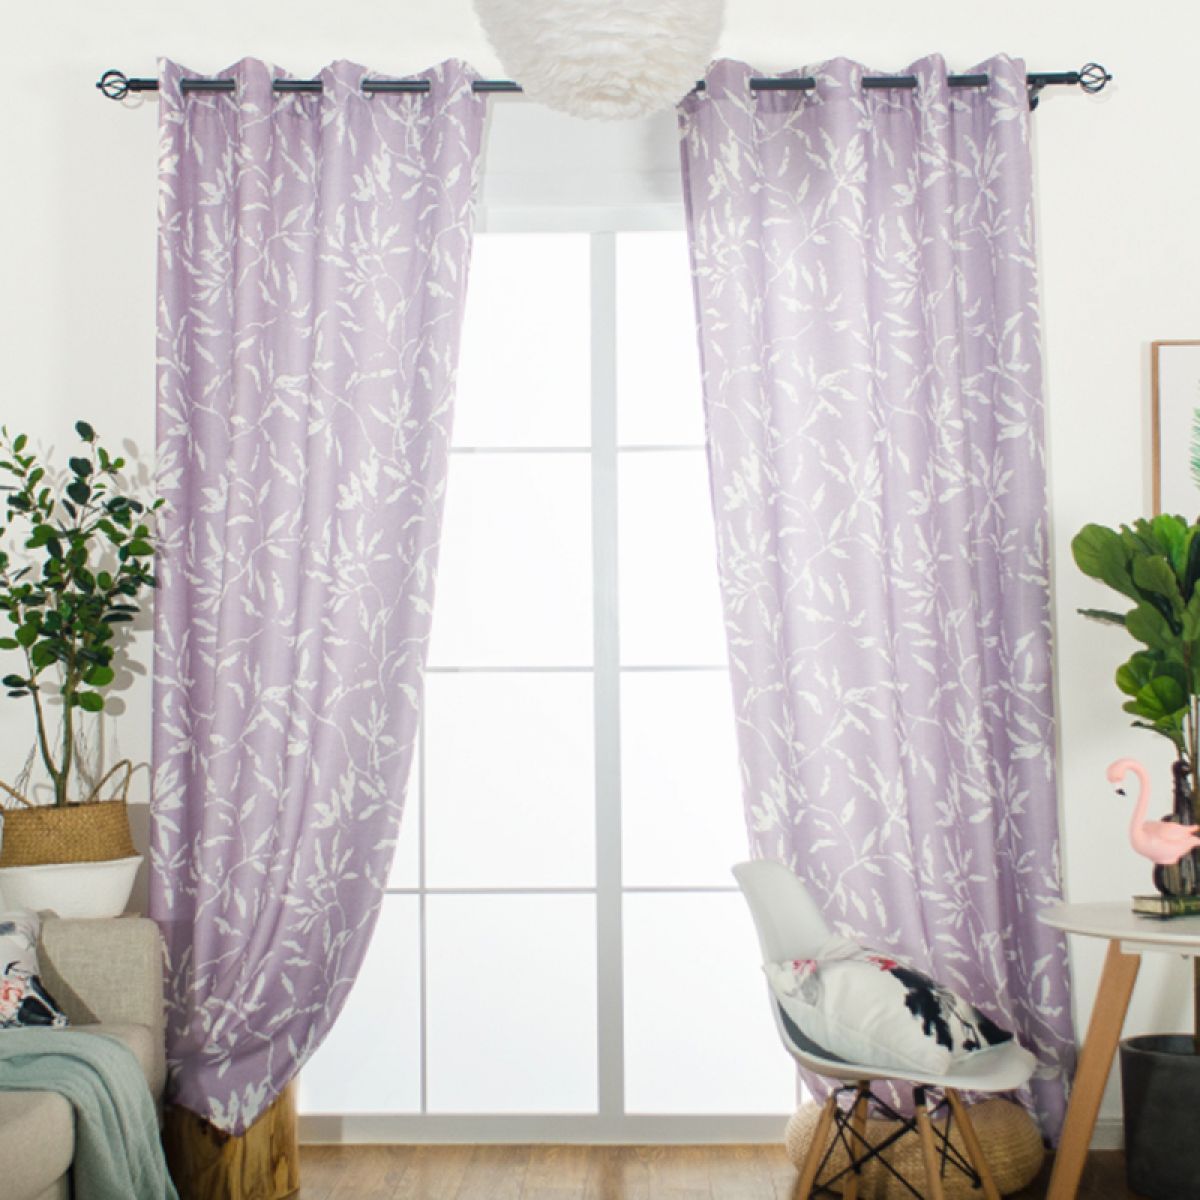 Plant Light Purple And White Background Printed Window Curtain Home Decor